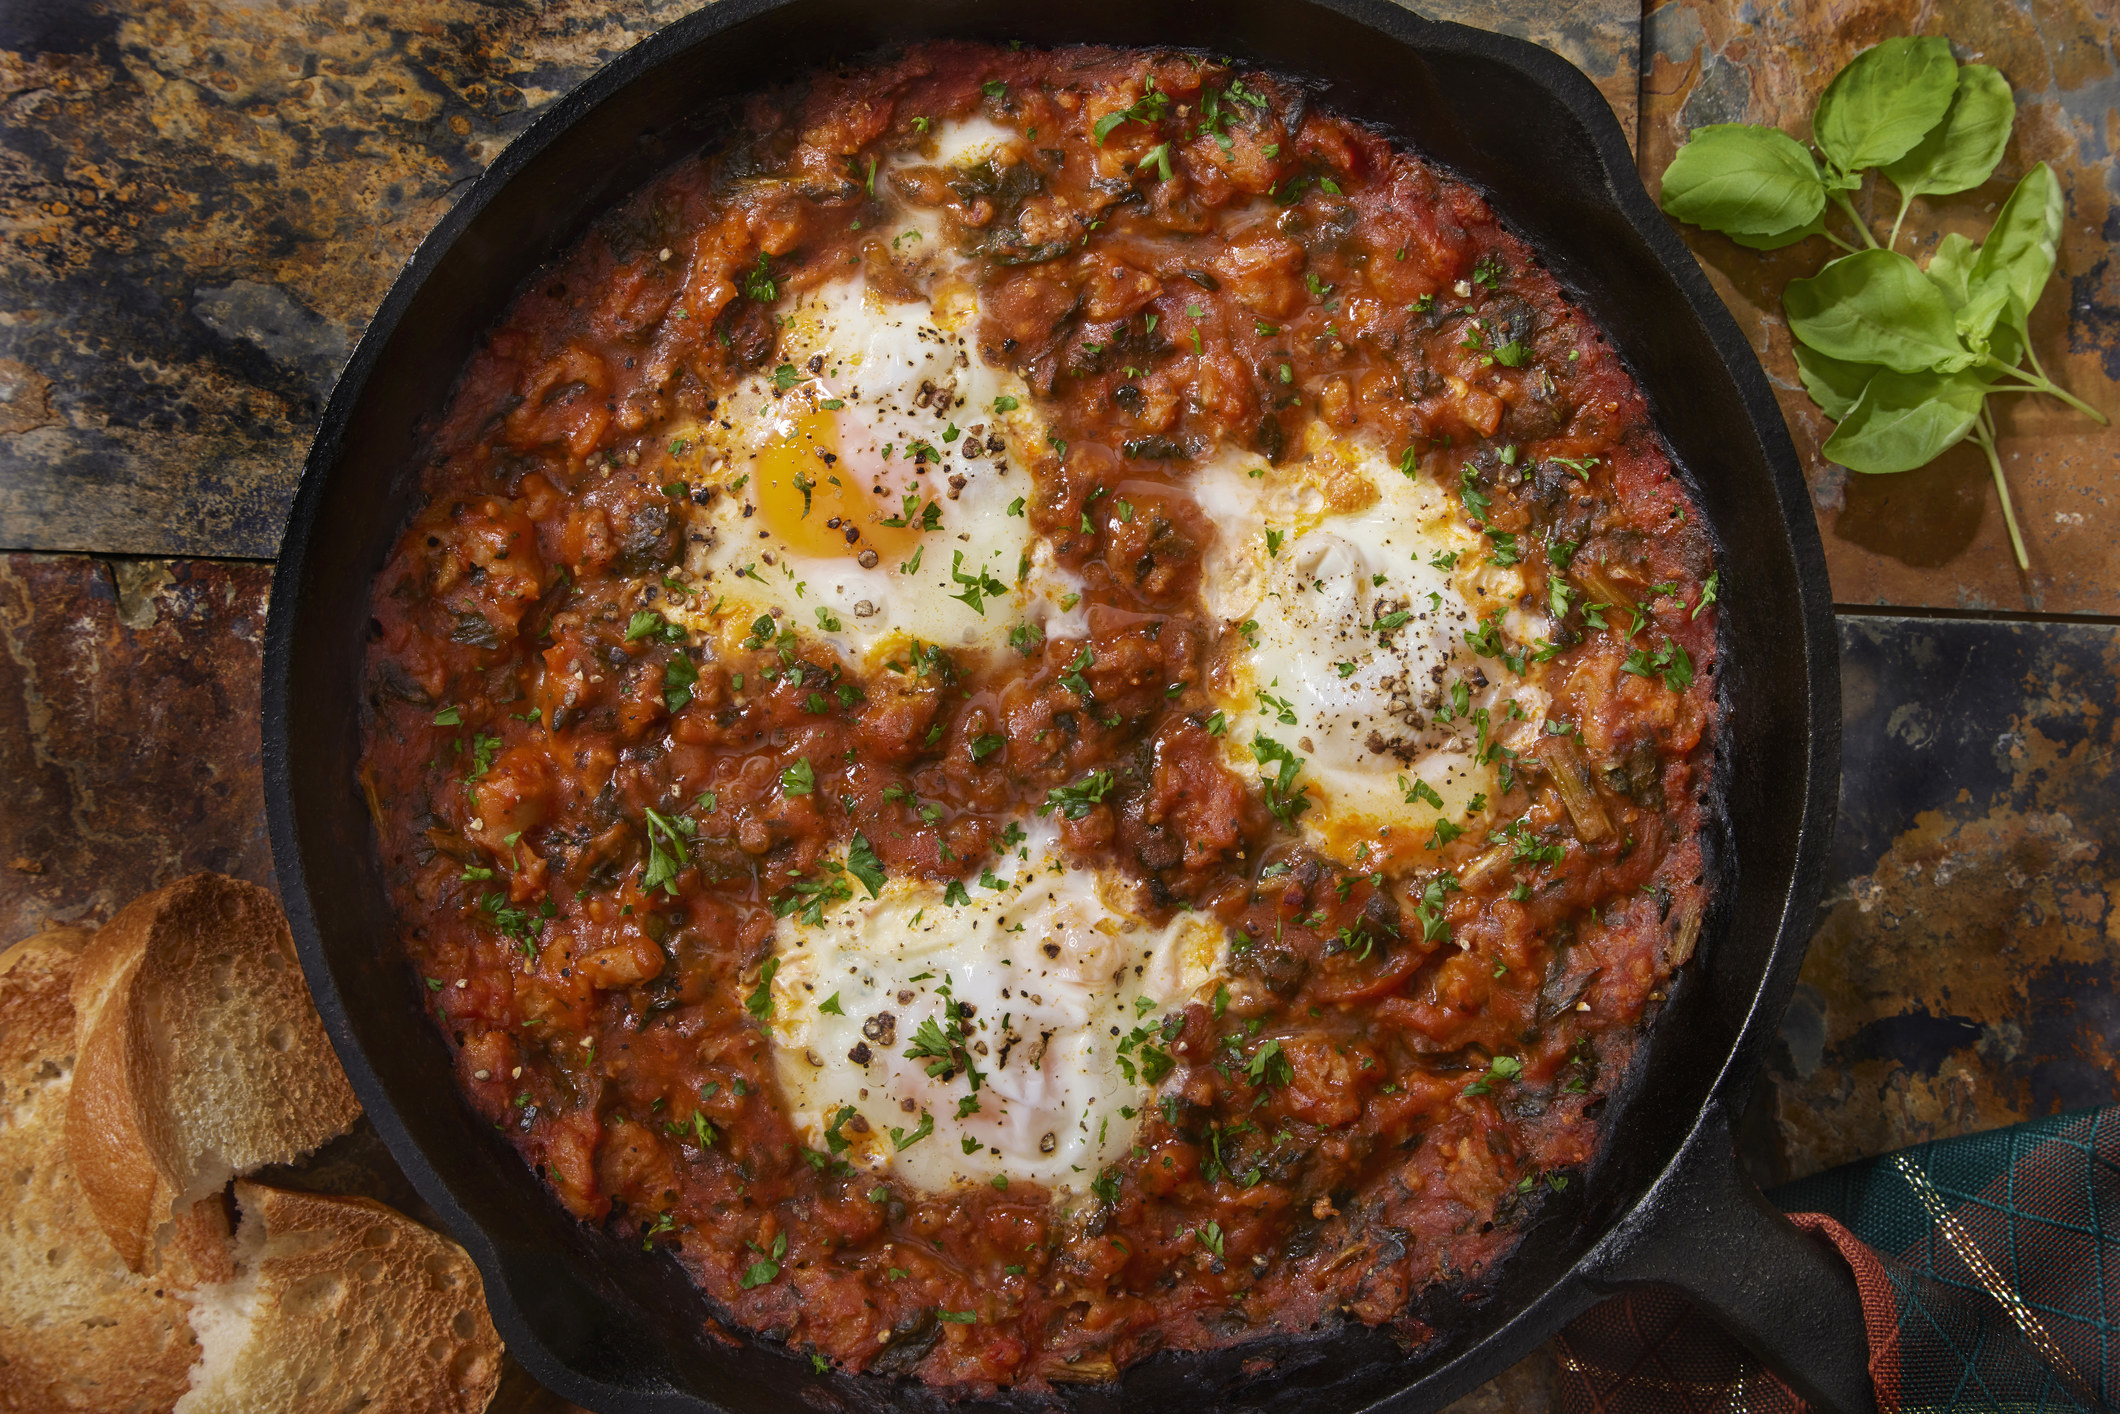 Eggs baked in tomato sauce.